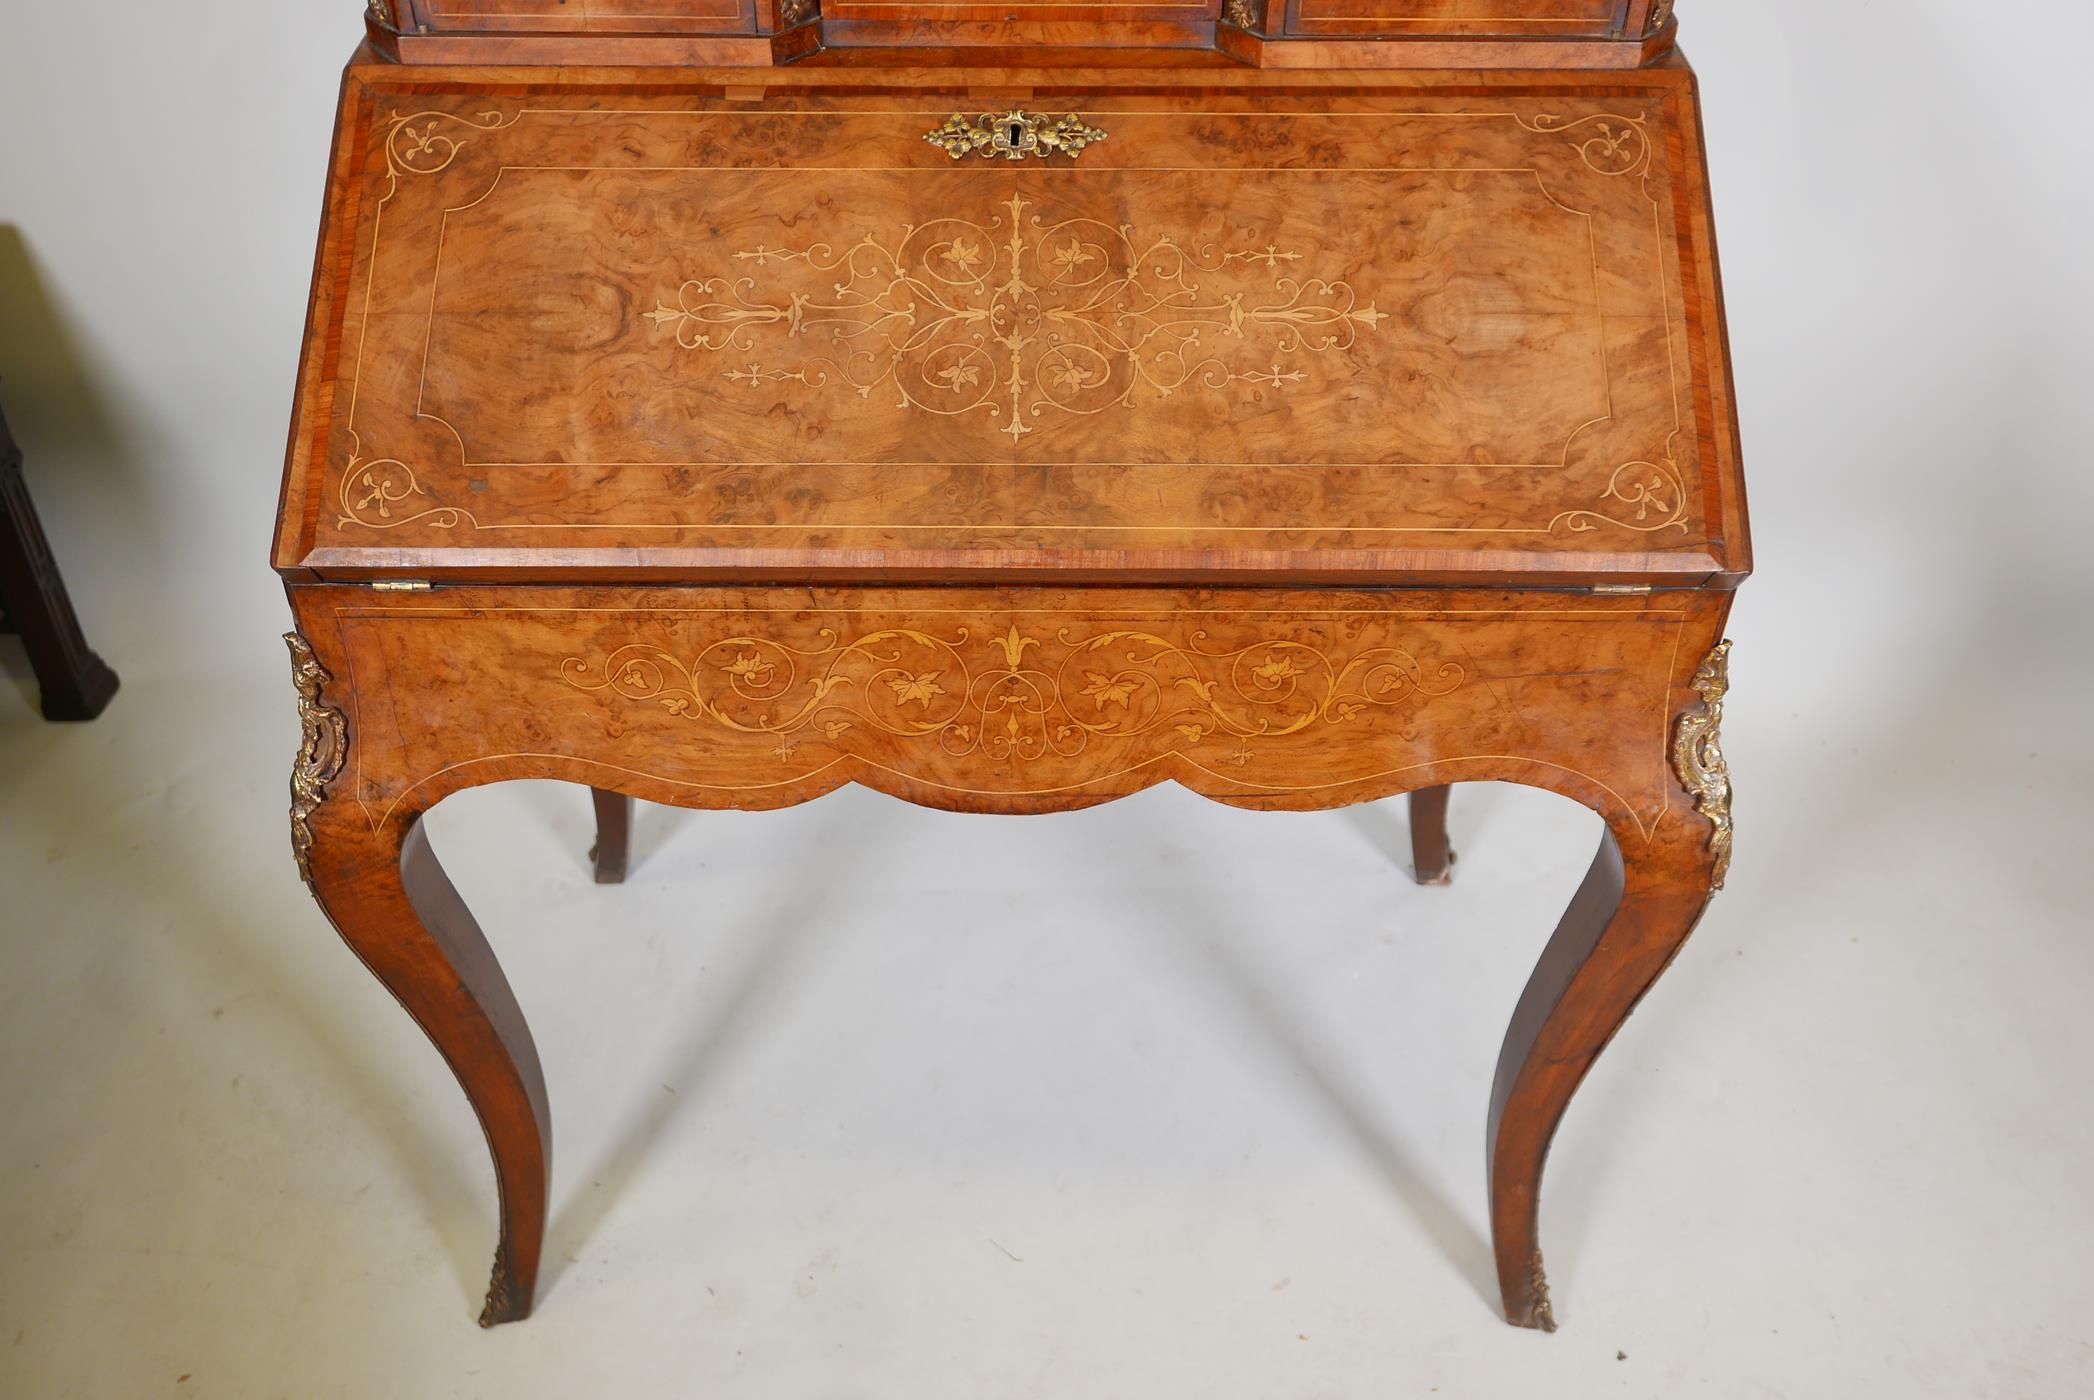 A Victorian inlaid, figured and burr walnut bonne-heure-de jour, with a brass galleried top and - Image 5 of 7